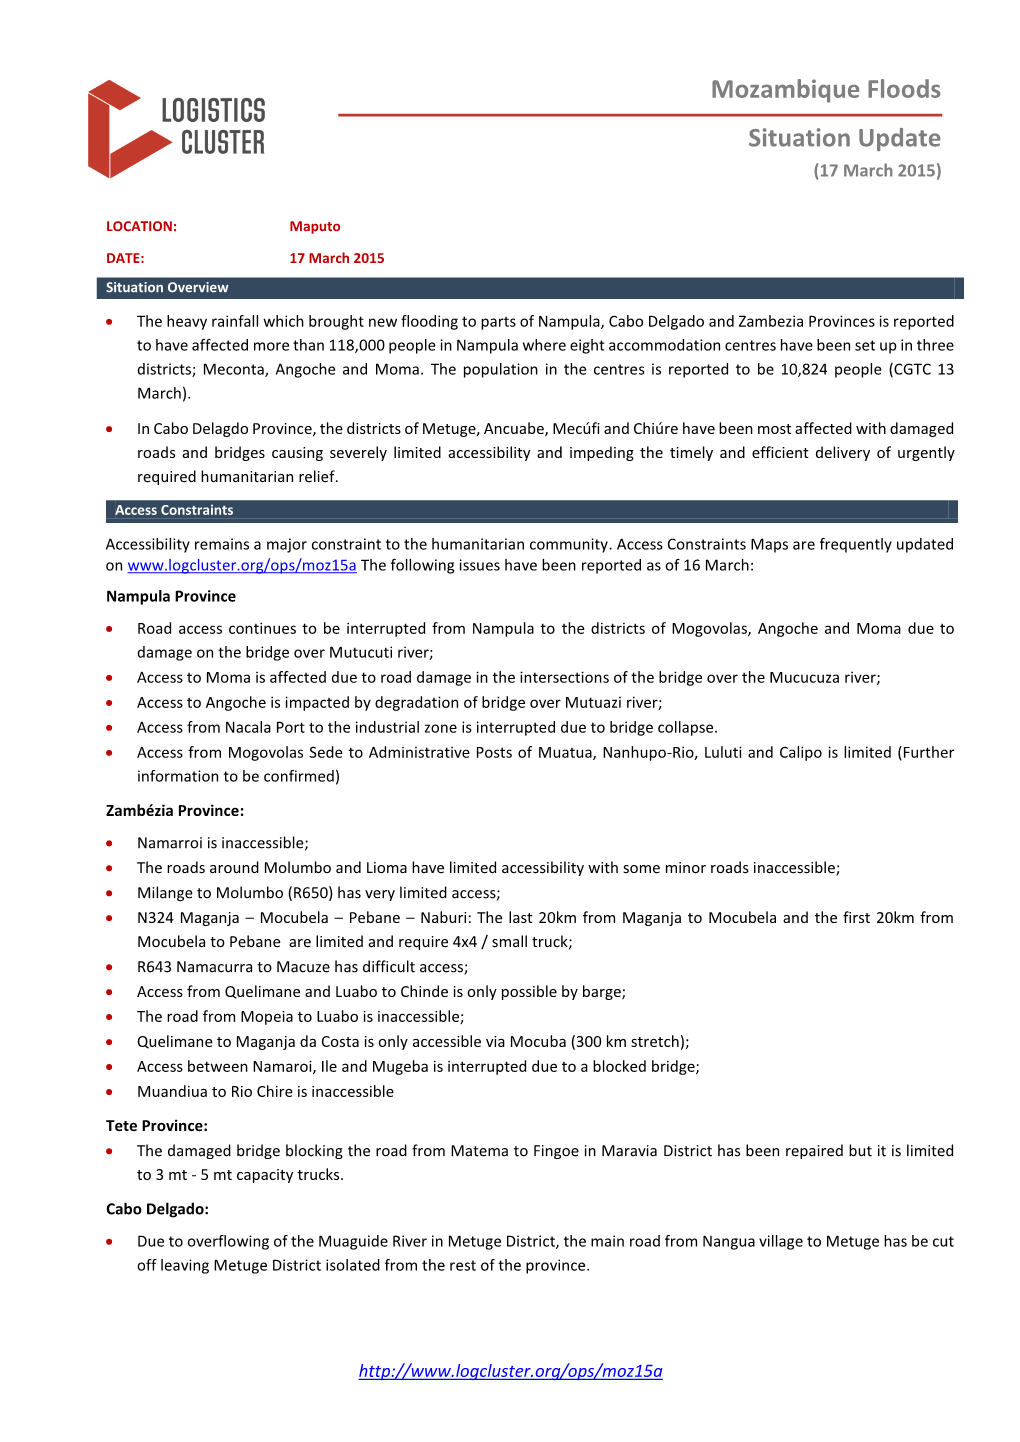 Mozambique Floods Situation Update (17 March 2015)